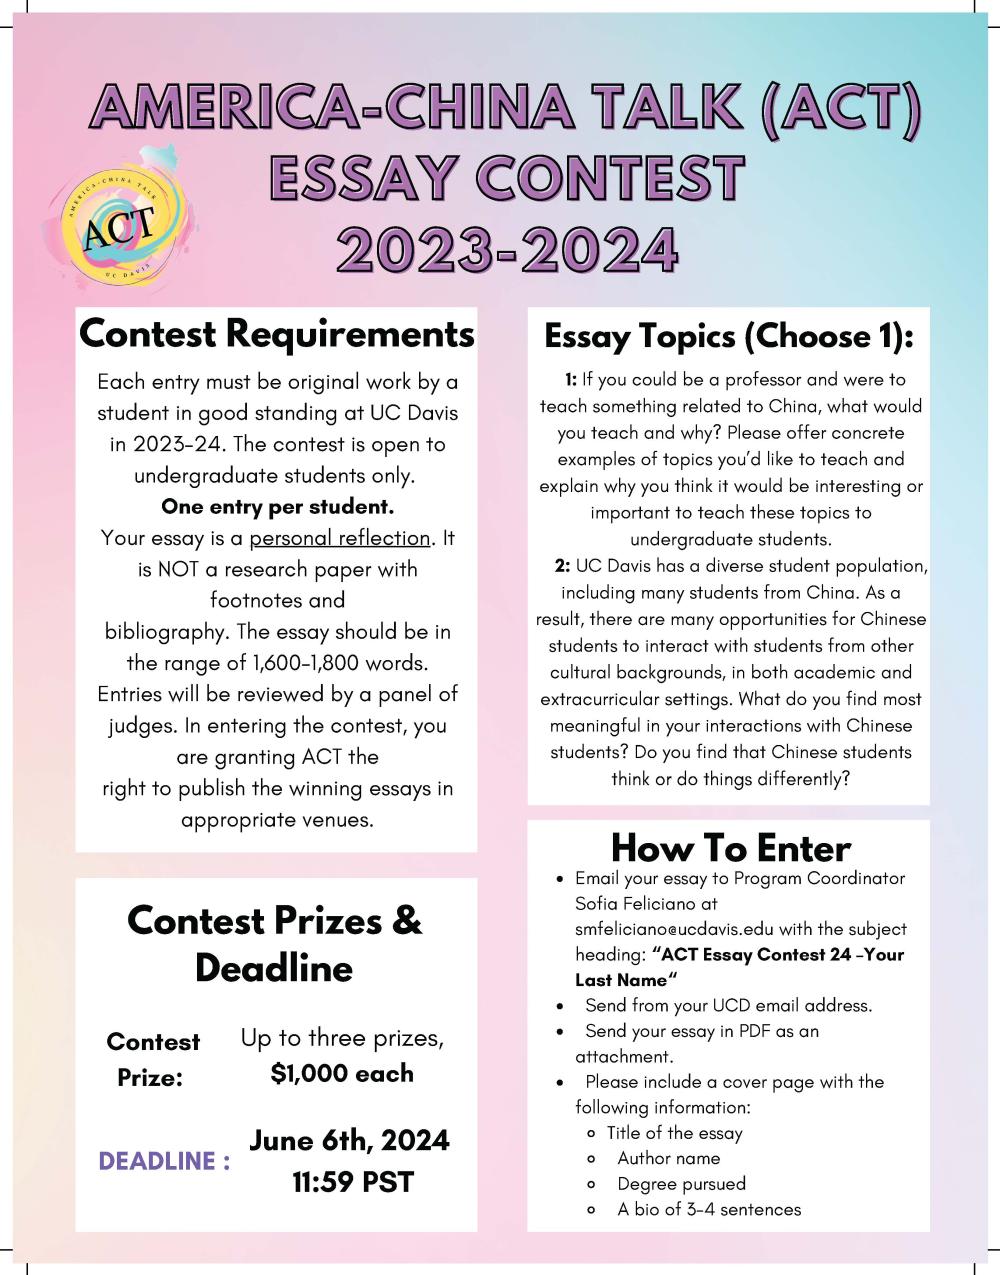 ACT essay guidelines. The text is written above.